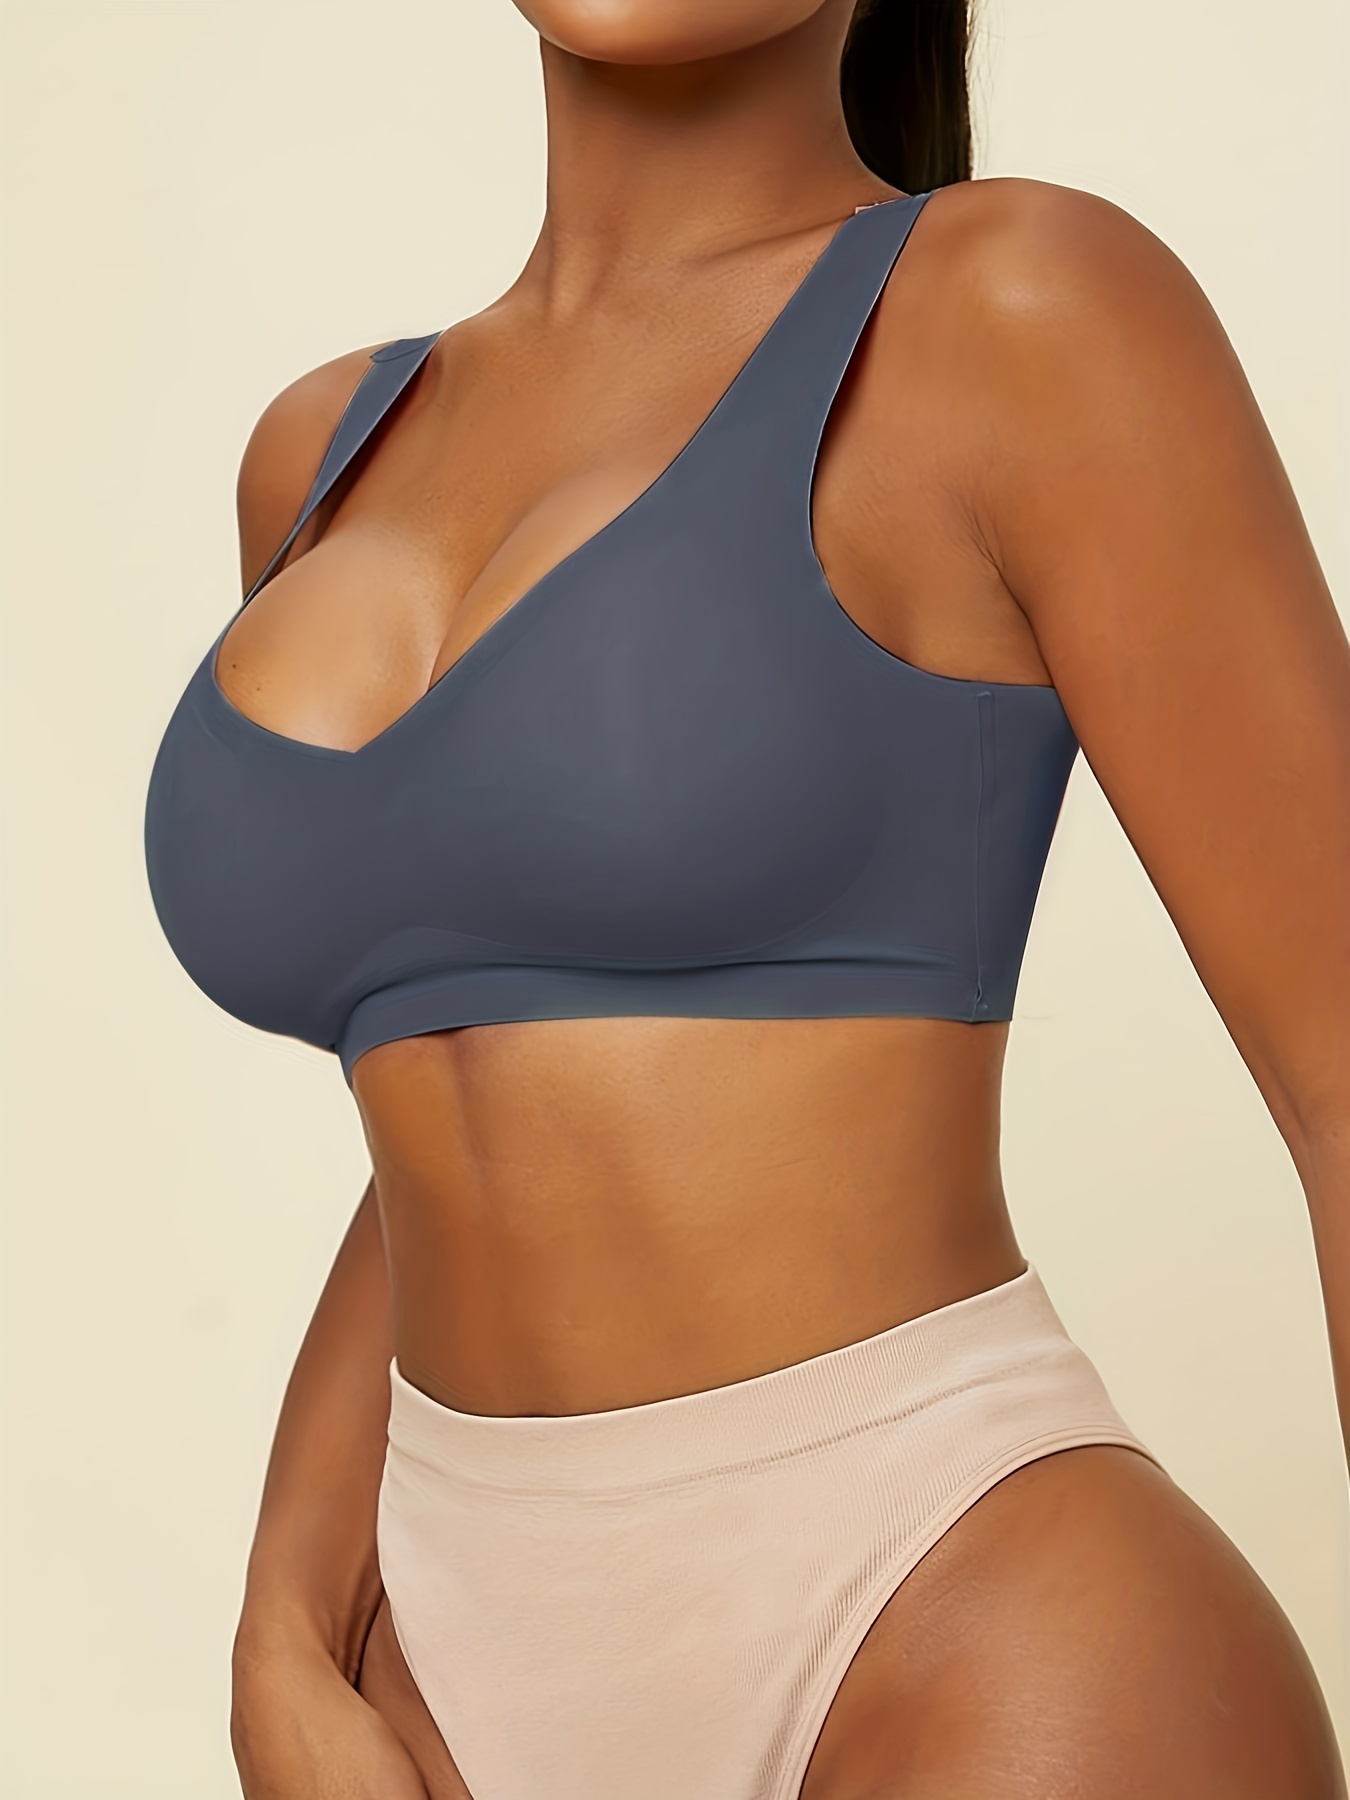 Simple Soft Solid Color Breathable Push-up Wireless bra, Shoulder Stra